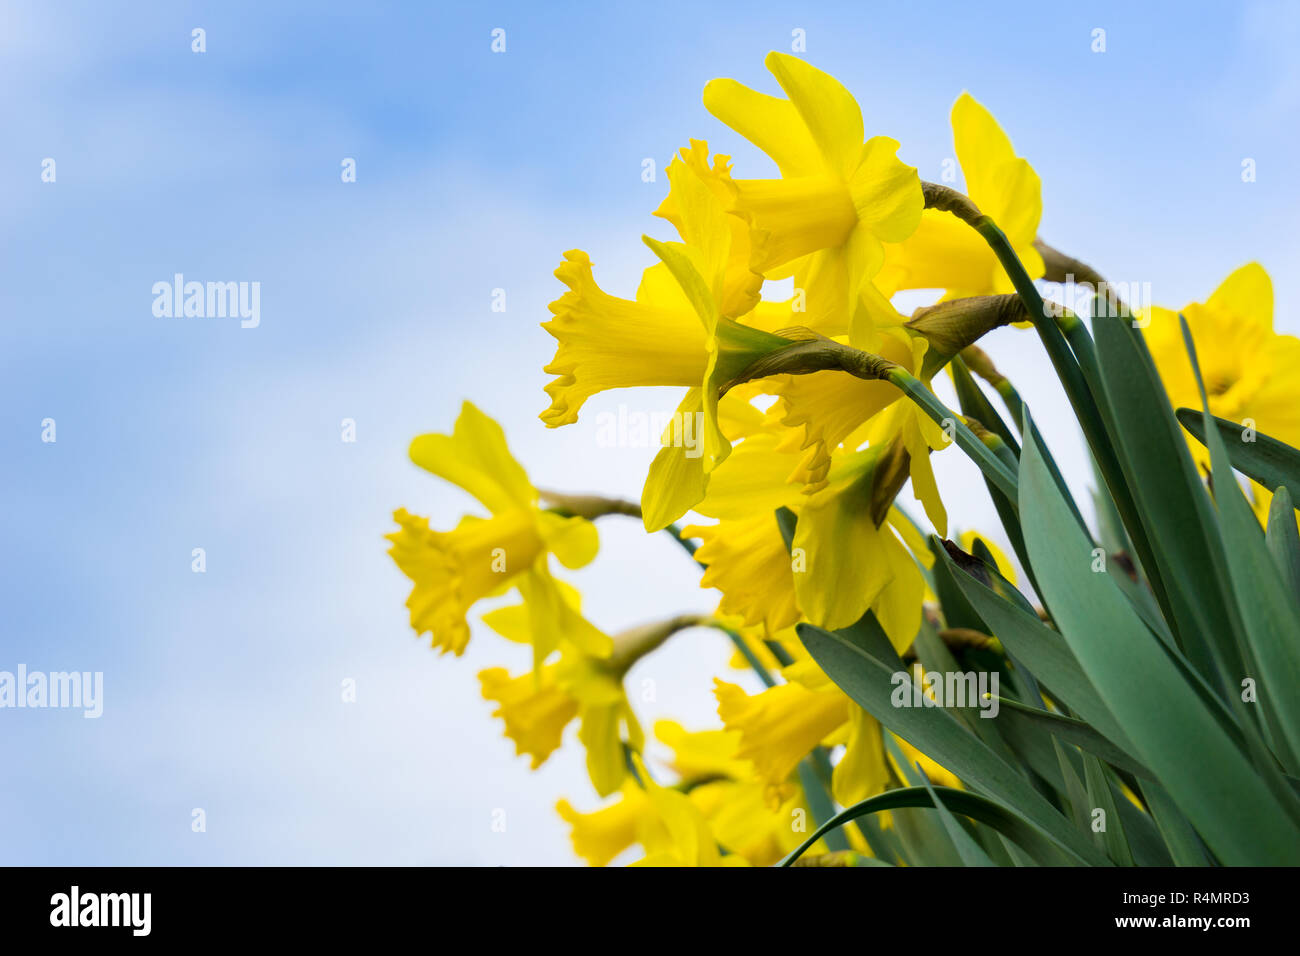 Daffodils in spring. Spring Flowers. Yellow Daffodils. Blooming Narcissus. Beautiful yellow Daffodils Stock Photo